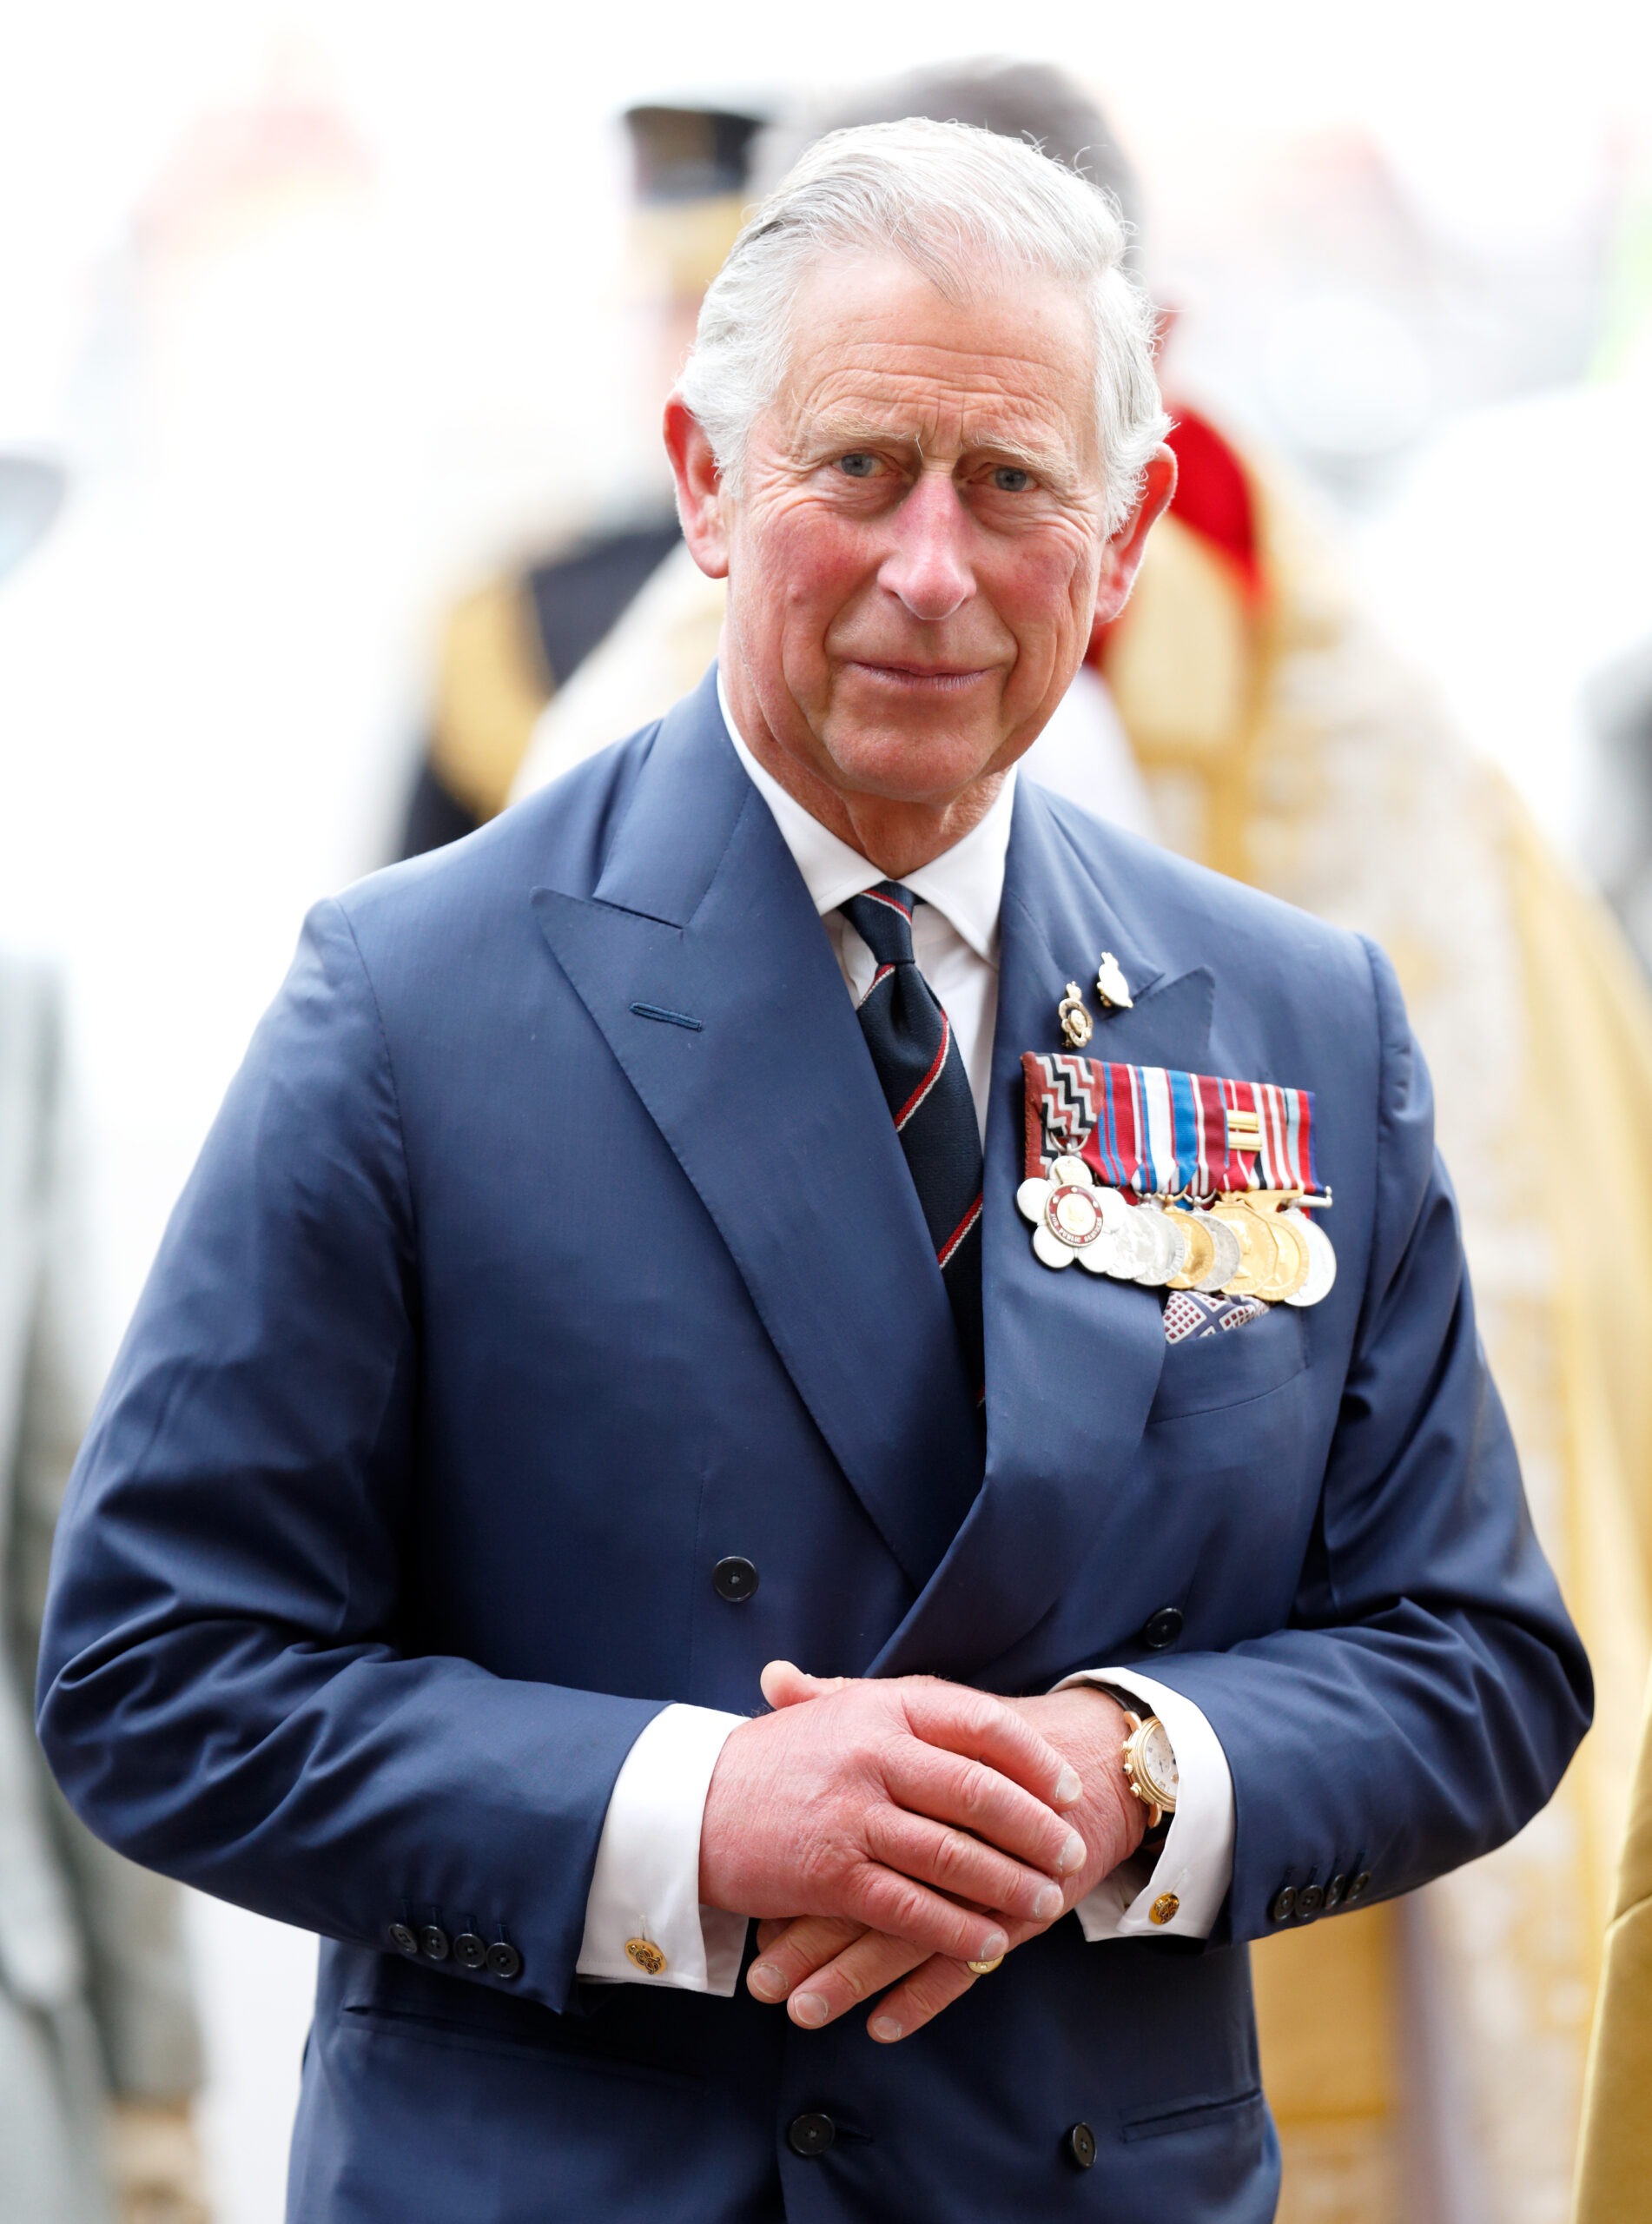 King Charles III at the 70th Anniversary of VE Day event in London, England on May 10, 2015 | Source: Getty Images